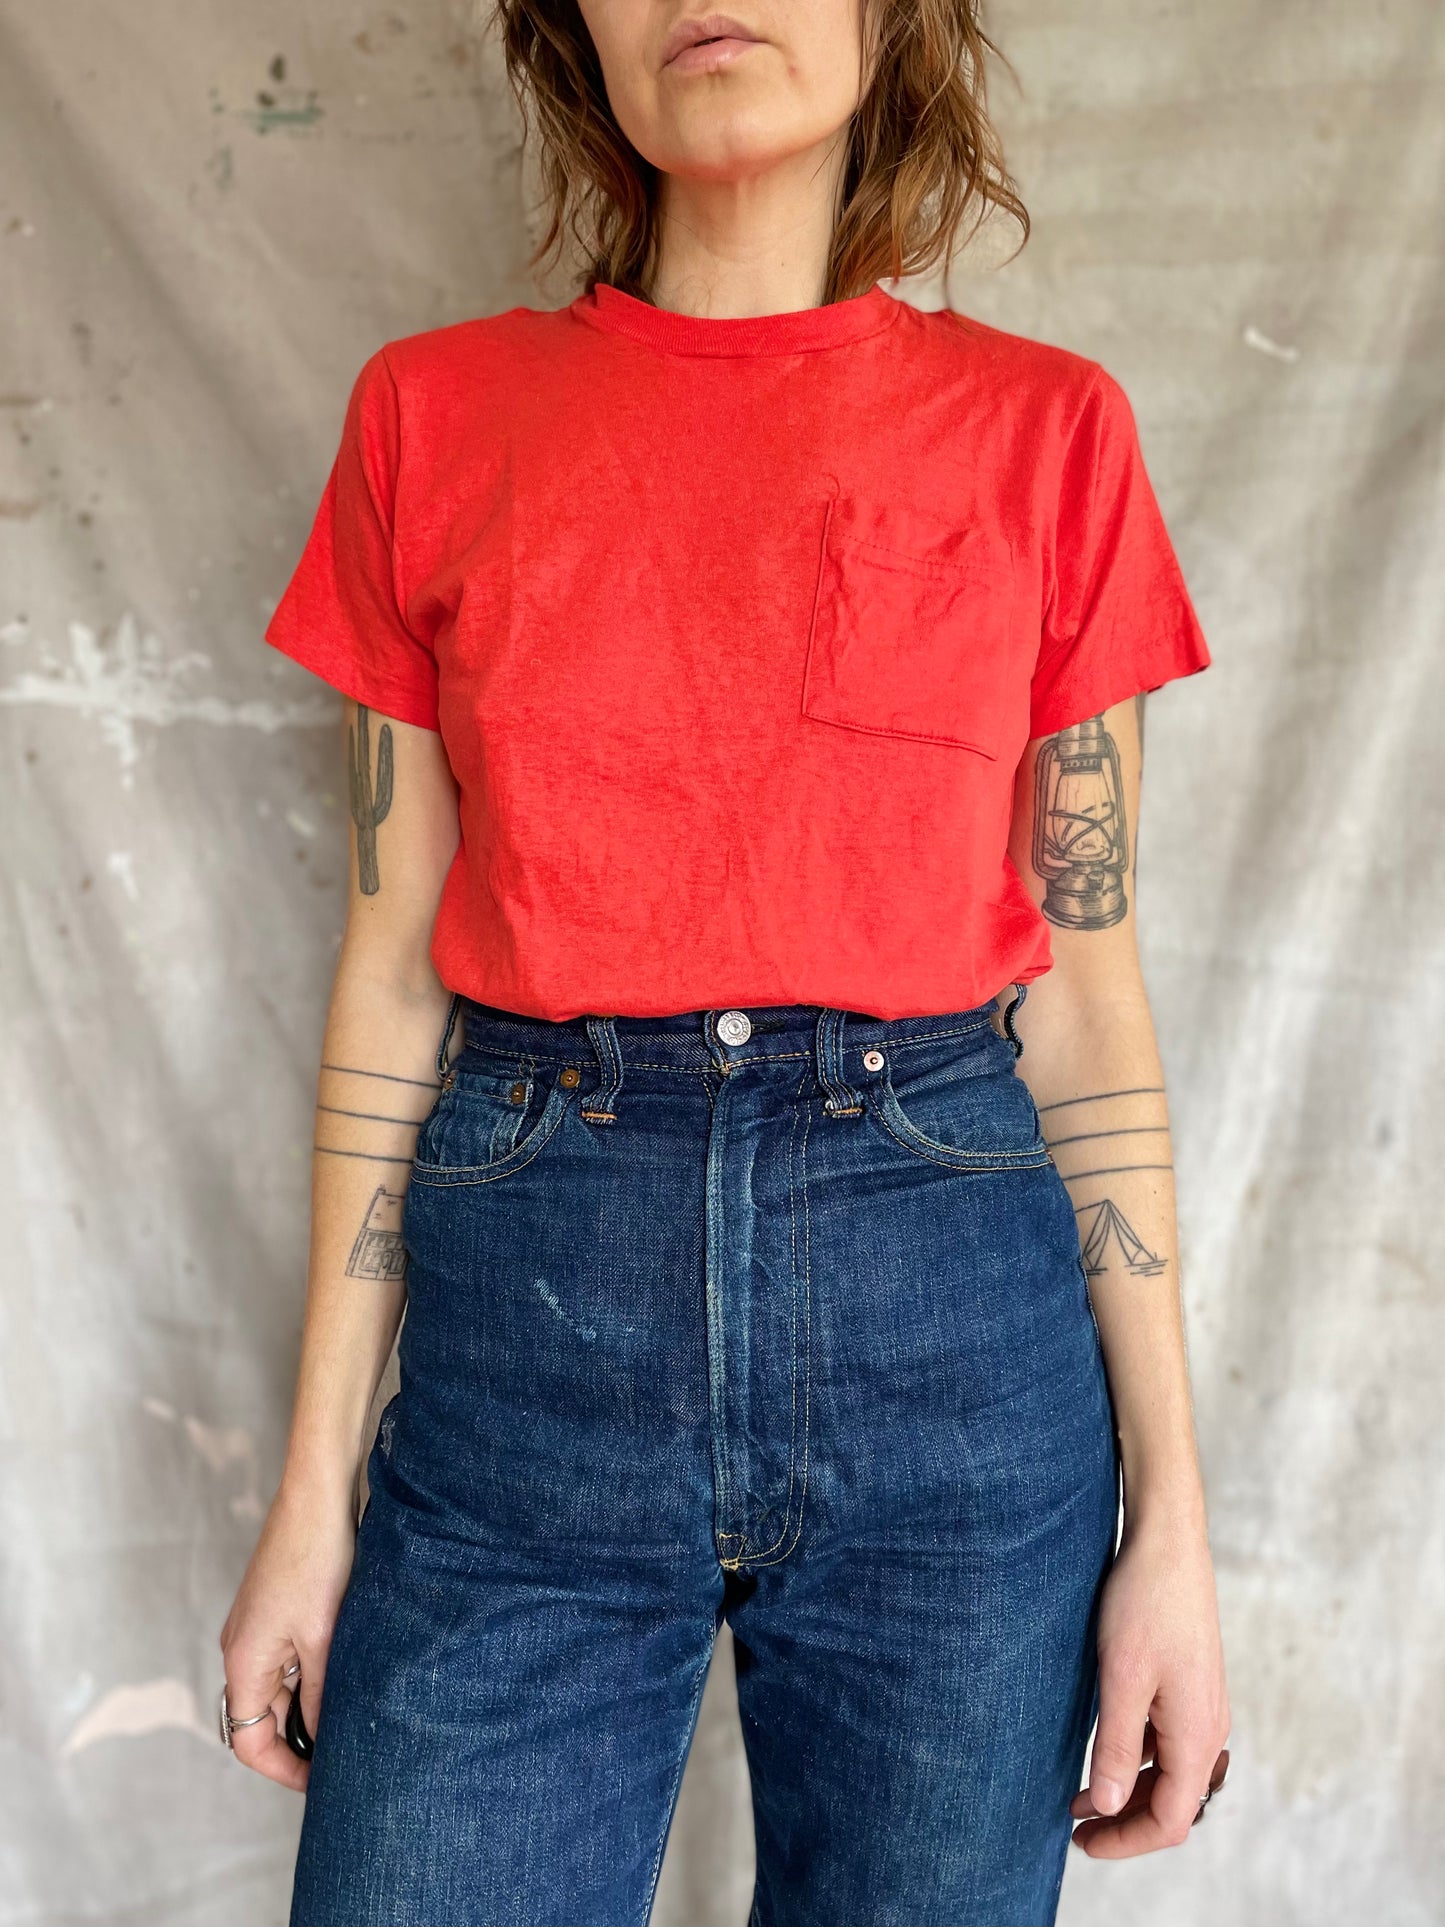 80s Bright Red Pocket Tee